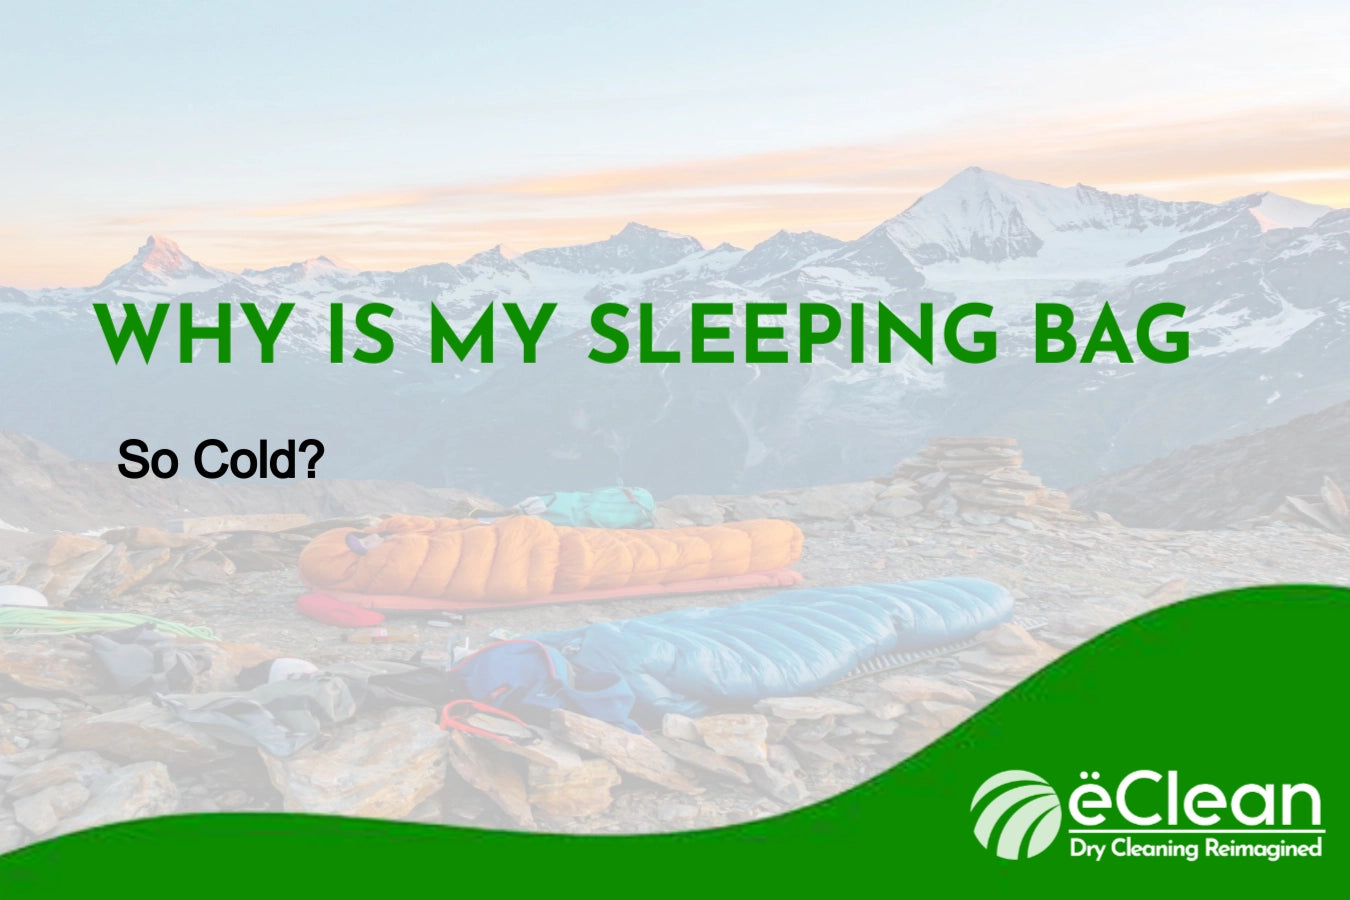 Why Is My Sleeping Bag So Cold?